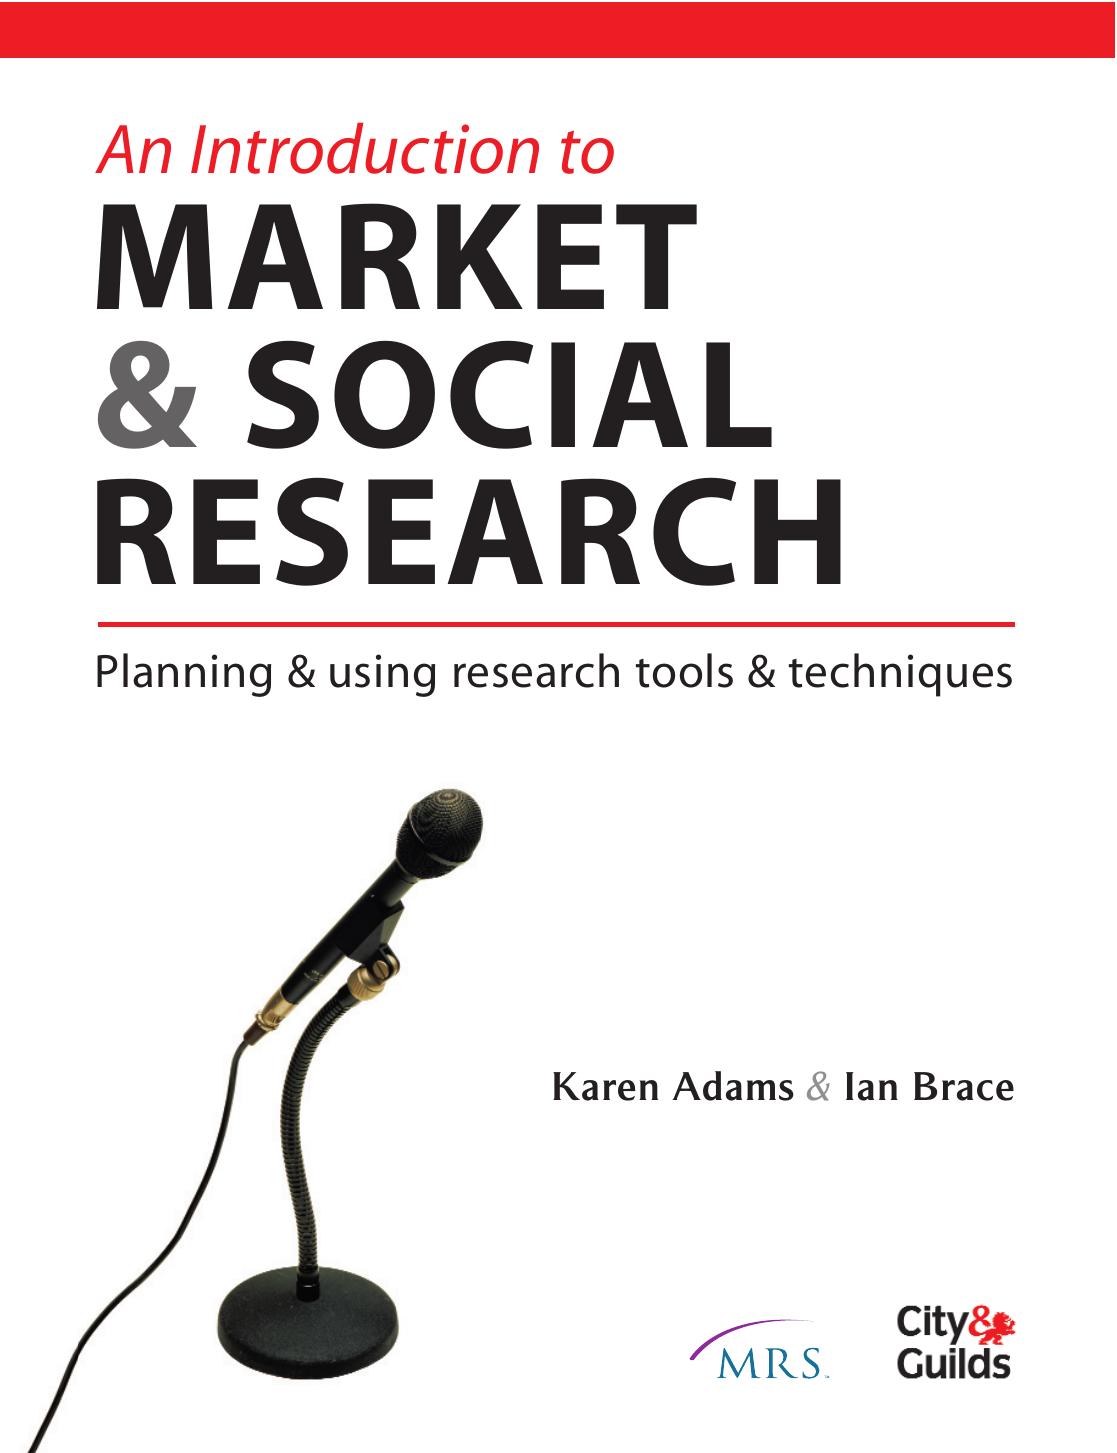 An Introduction to Market & Social Research  Planning & Using Research Tools & Techniques 2006